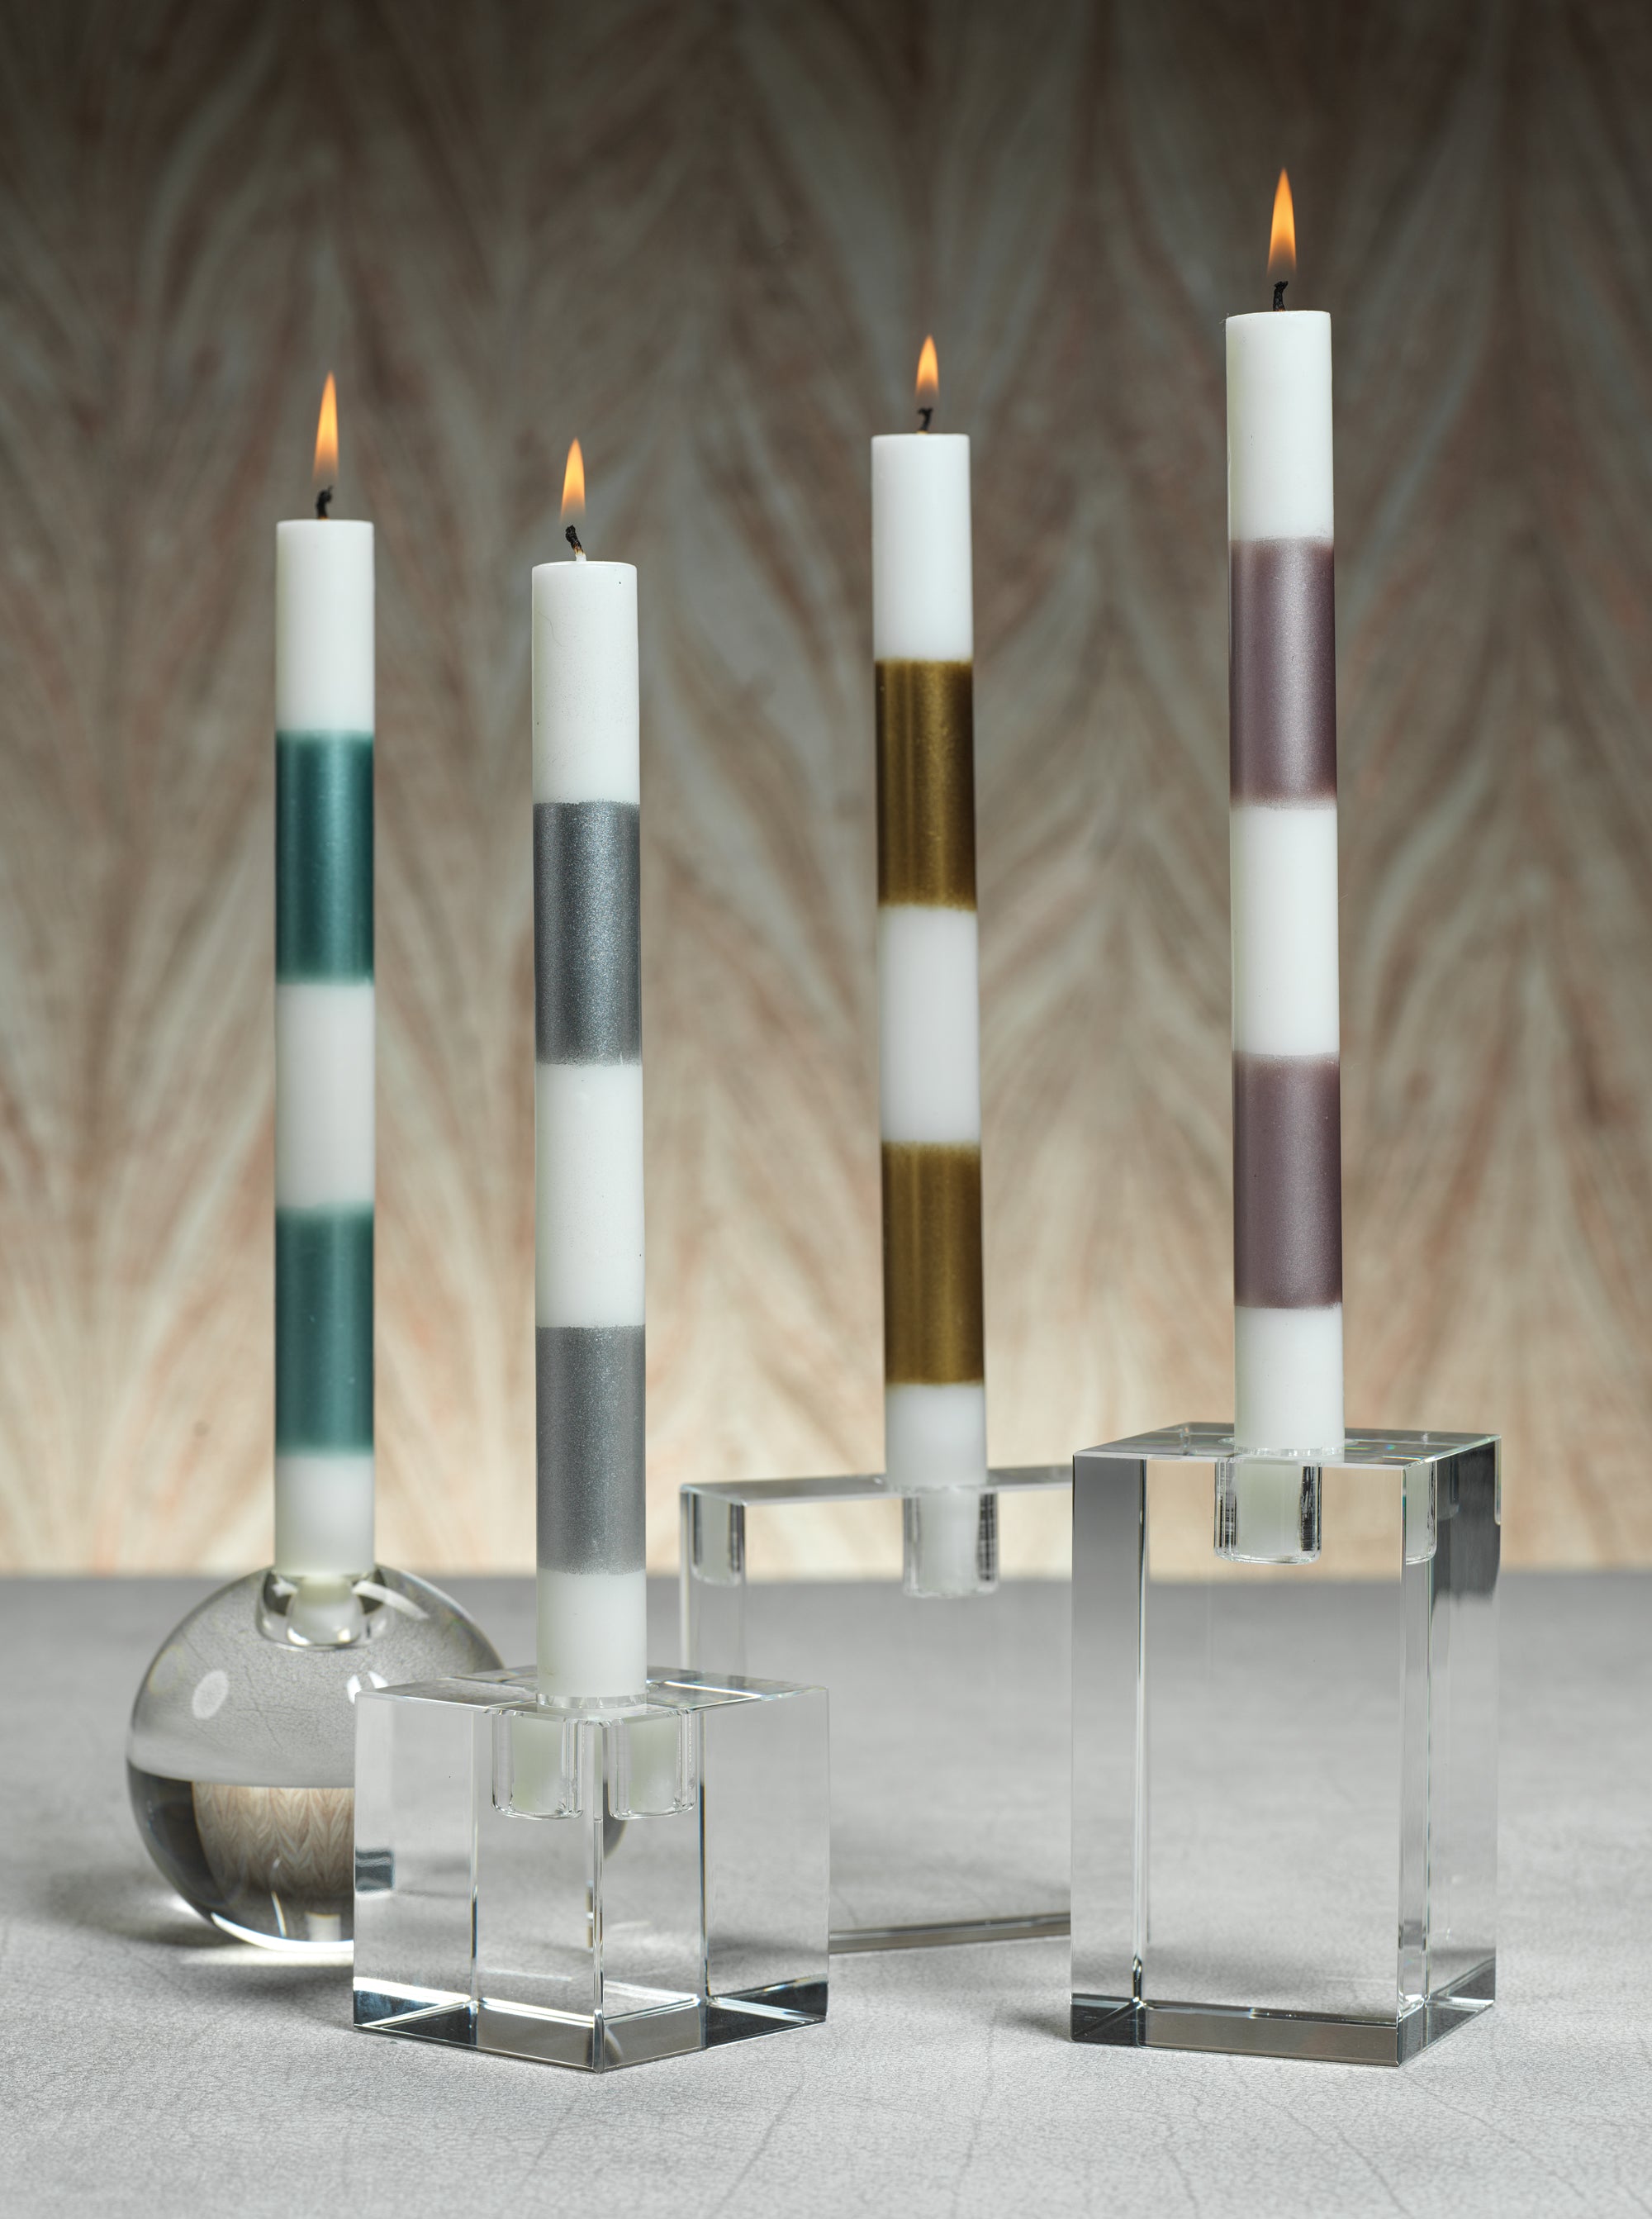 Modern & Festive Metallic Formal Taper Candles - Box of 6 - CARLYLE AVENUE